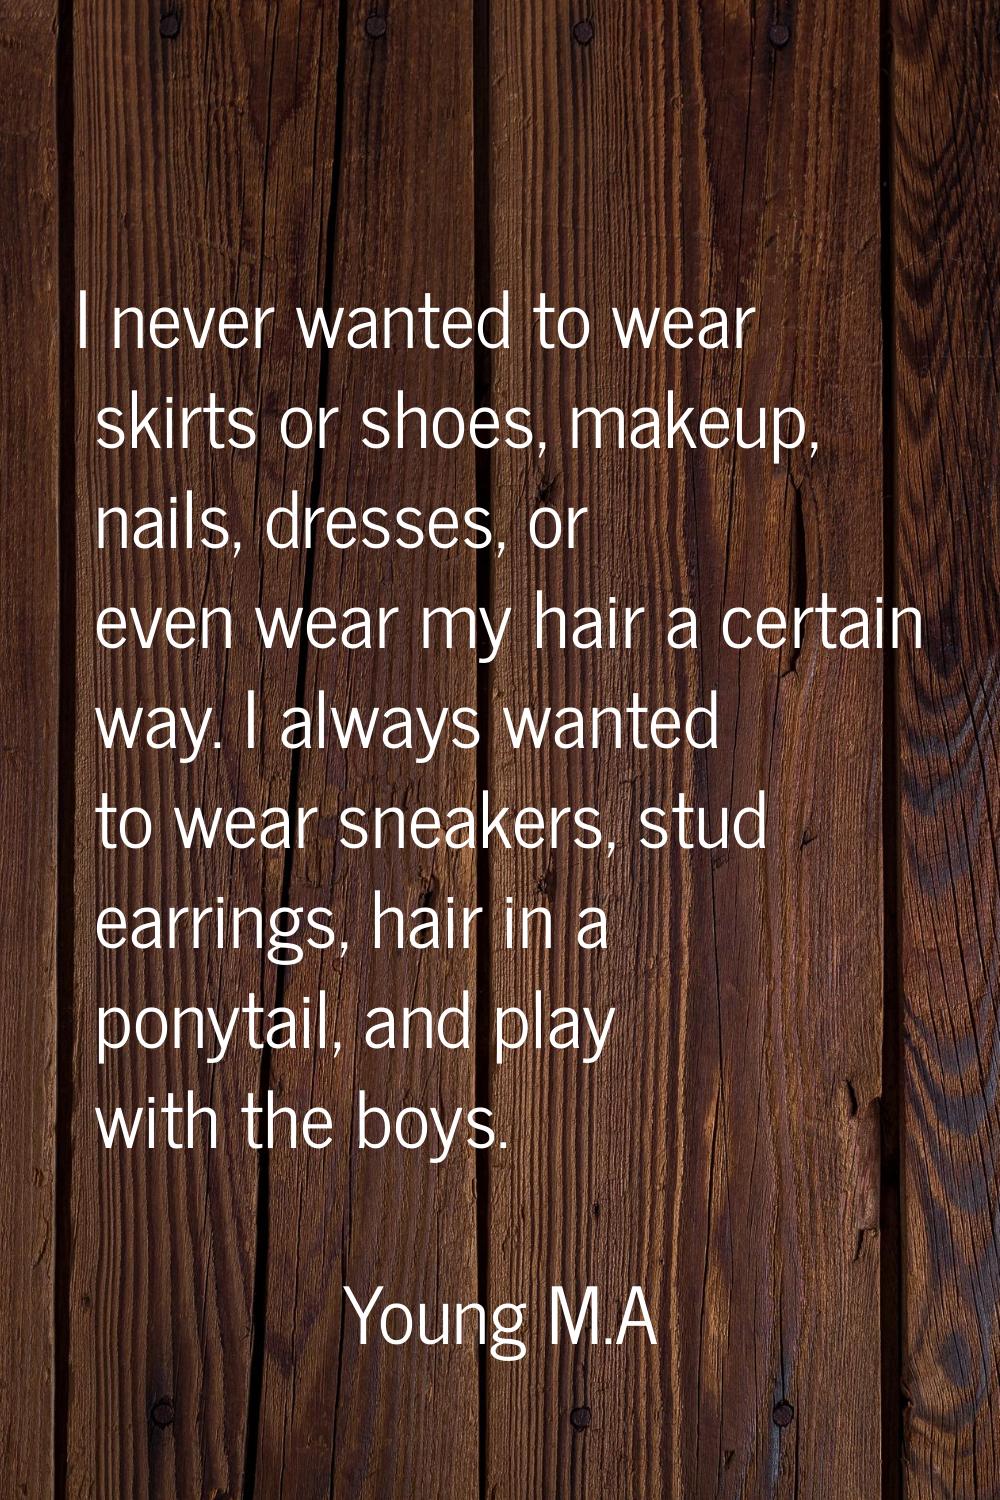 I never wanted to wear skirts or shoes, makeup, nails, dresses, or even wear my hair a certain way.